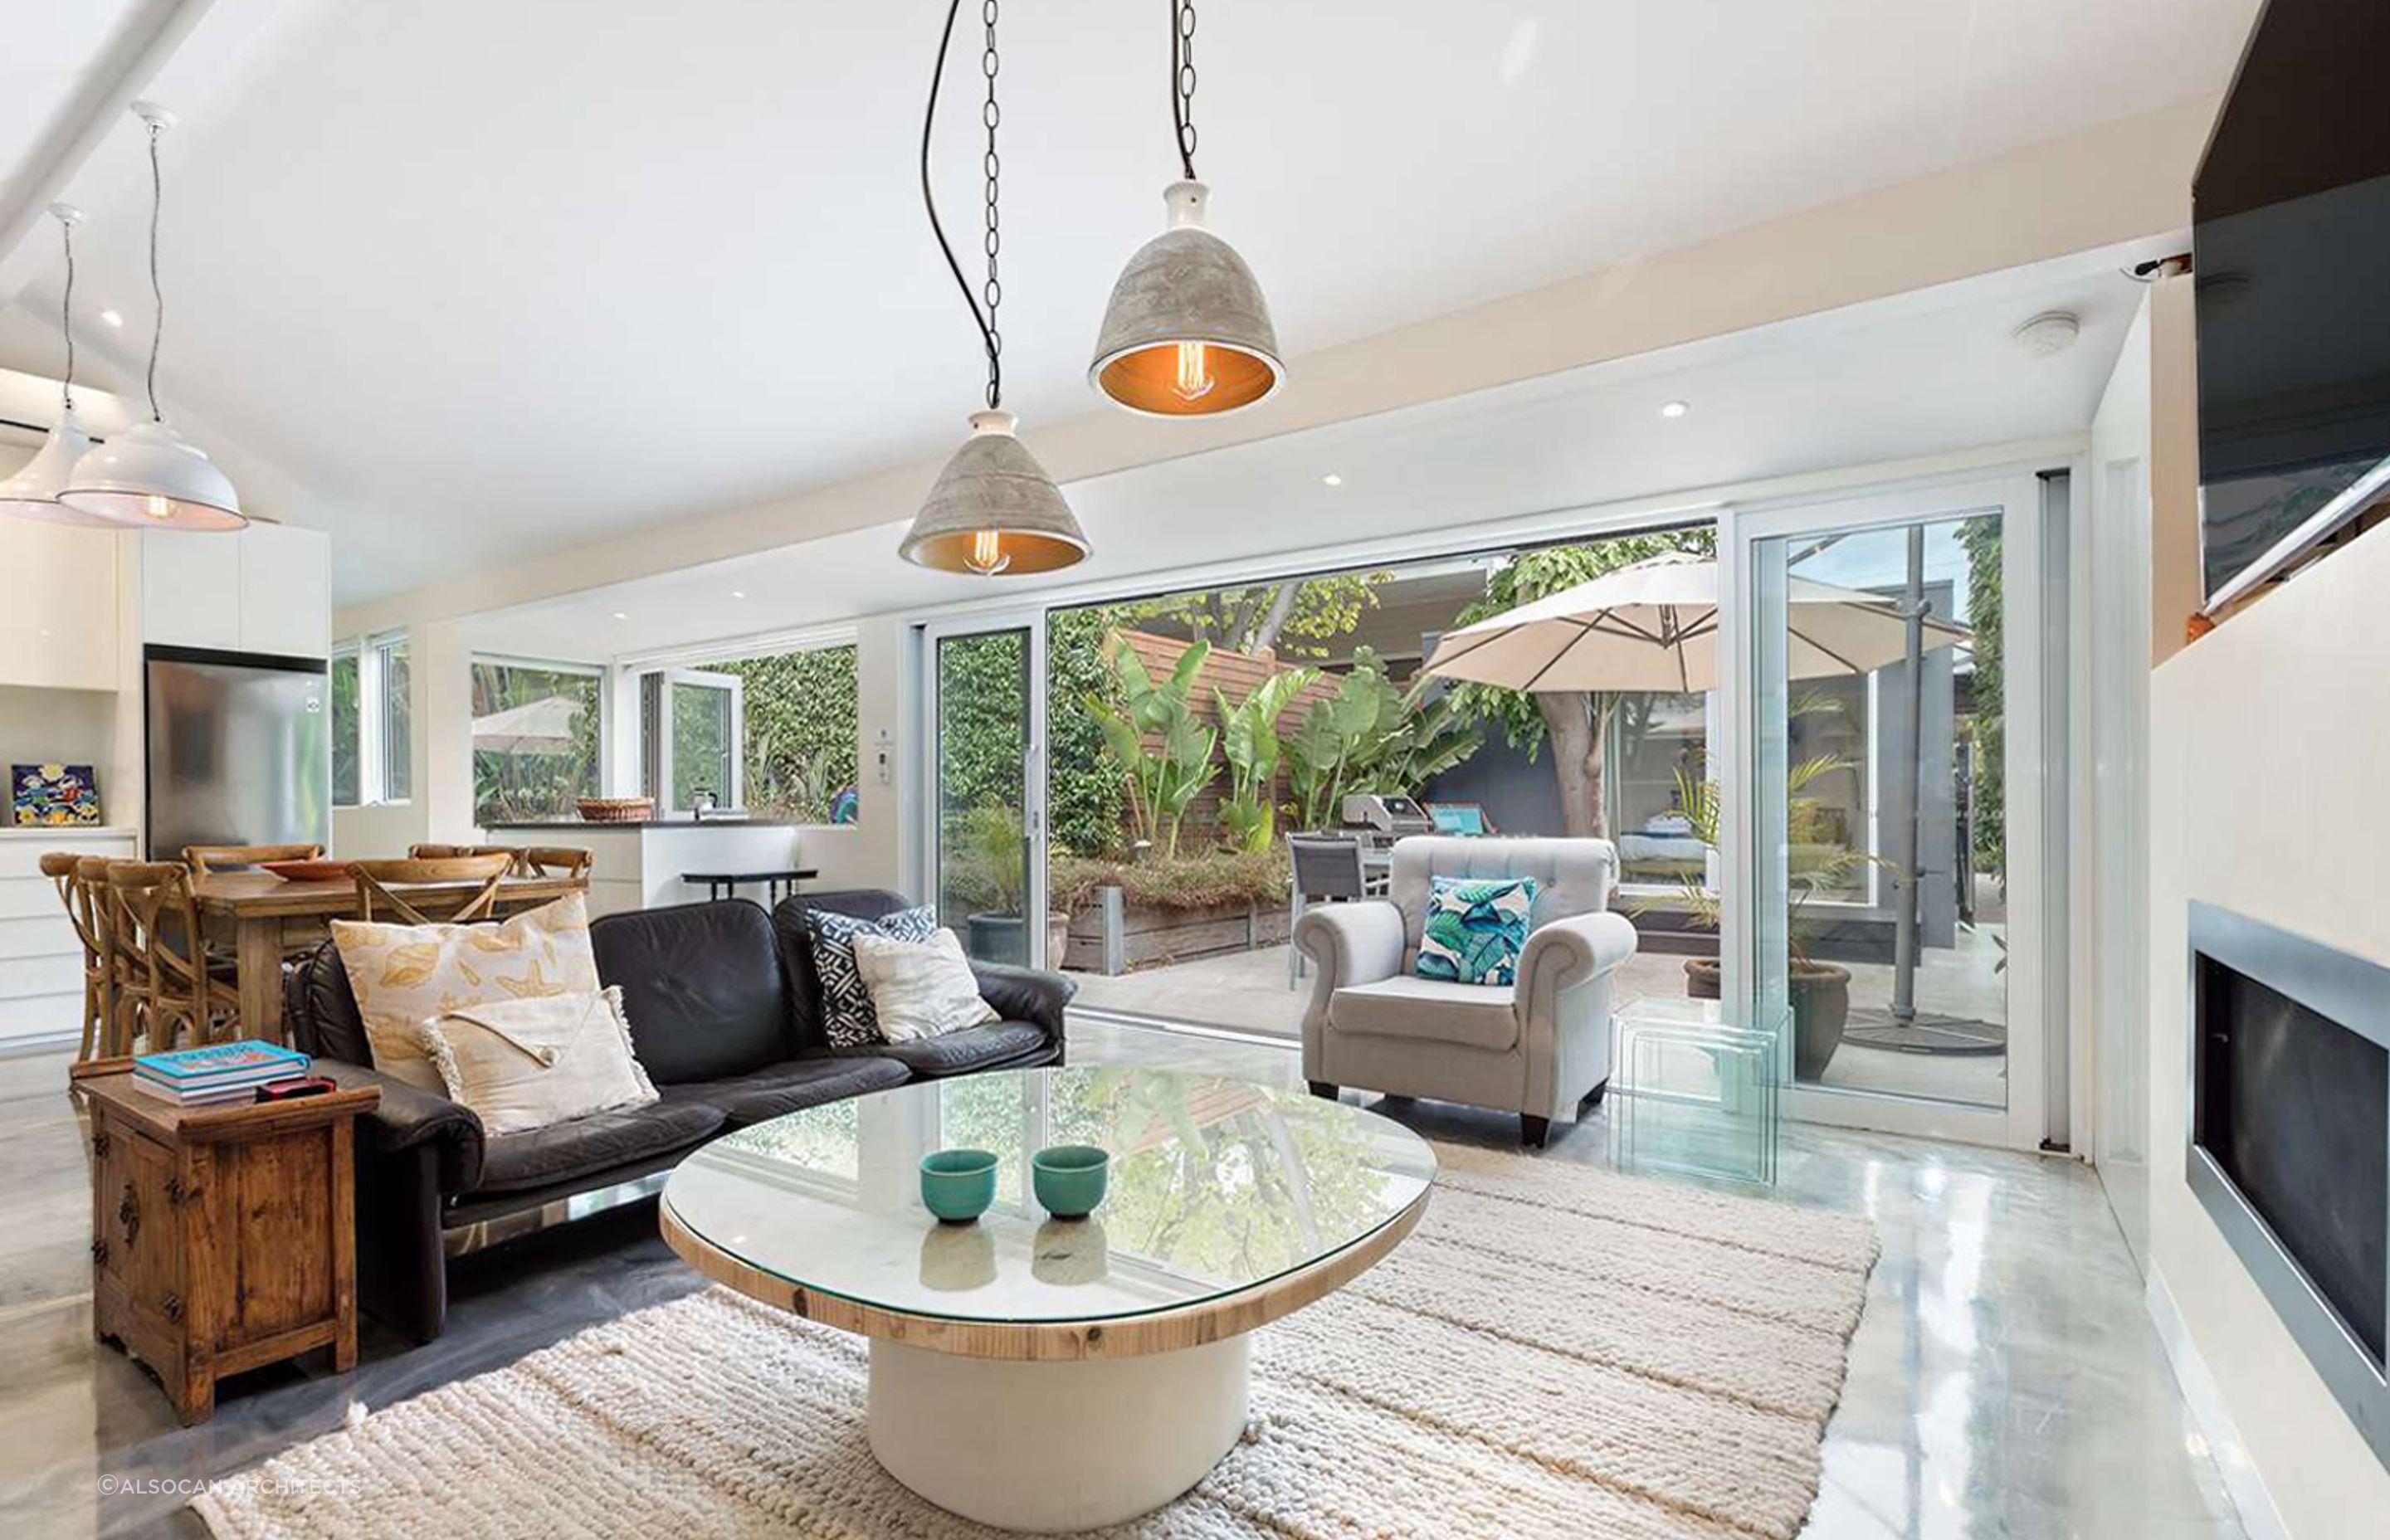 Pendant lights are popular in living rooms, such as in this Melbourne home.